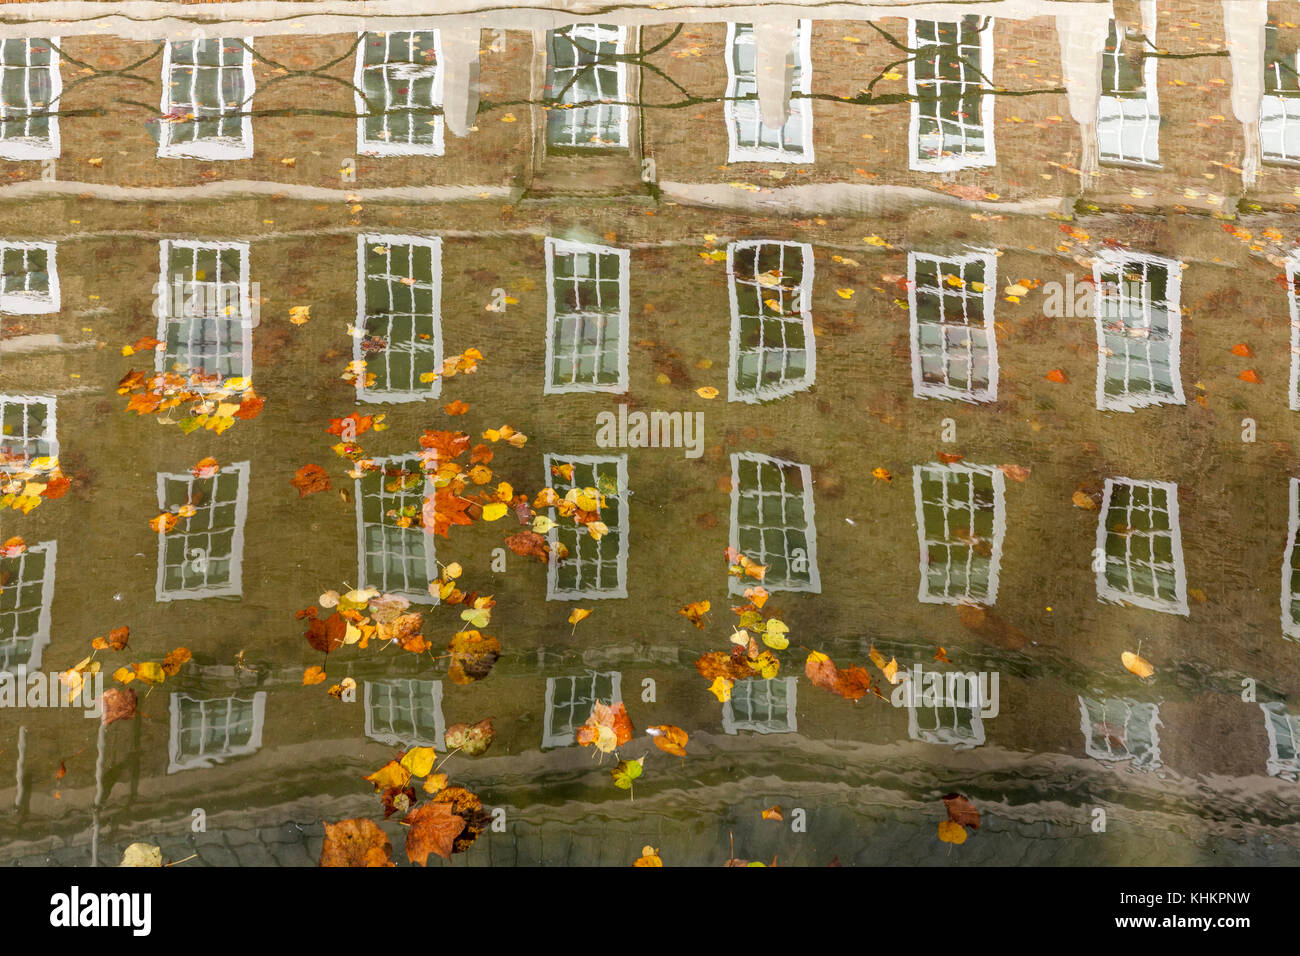 The windows of Bristol City Hall reflected in the moat water, with russet, gold, brown and yellow leaves floating on top. Bristol, West England. Stock Photo